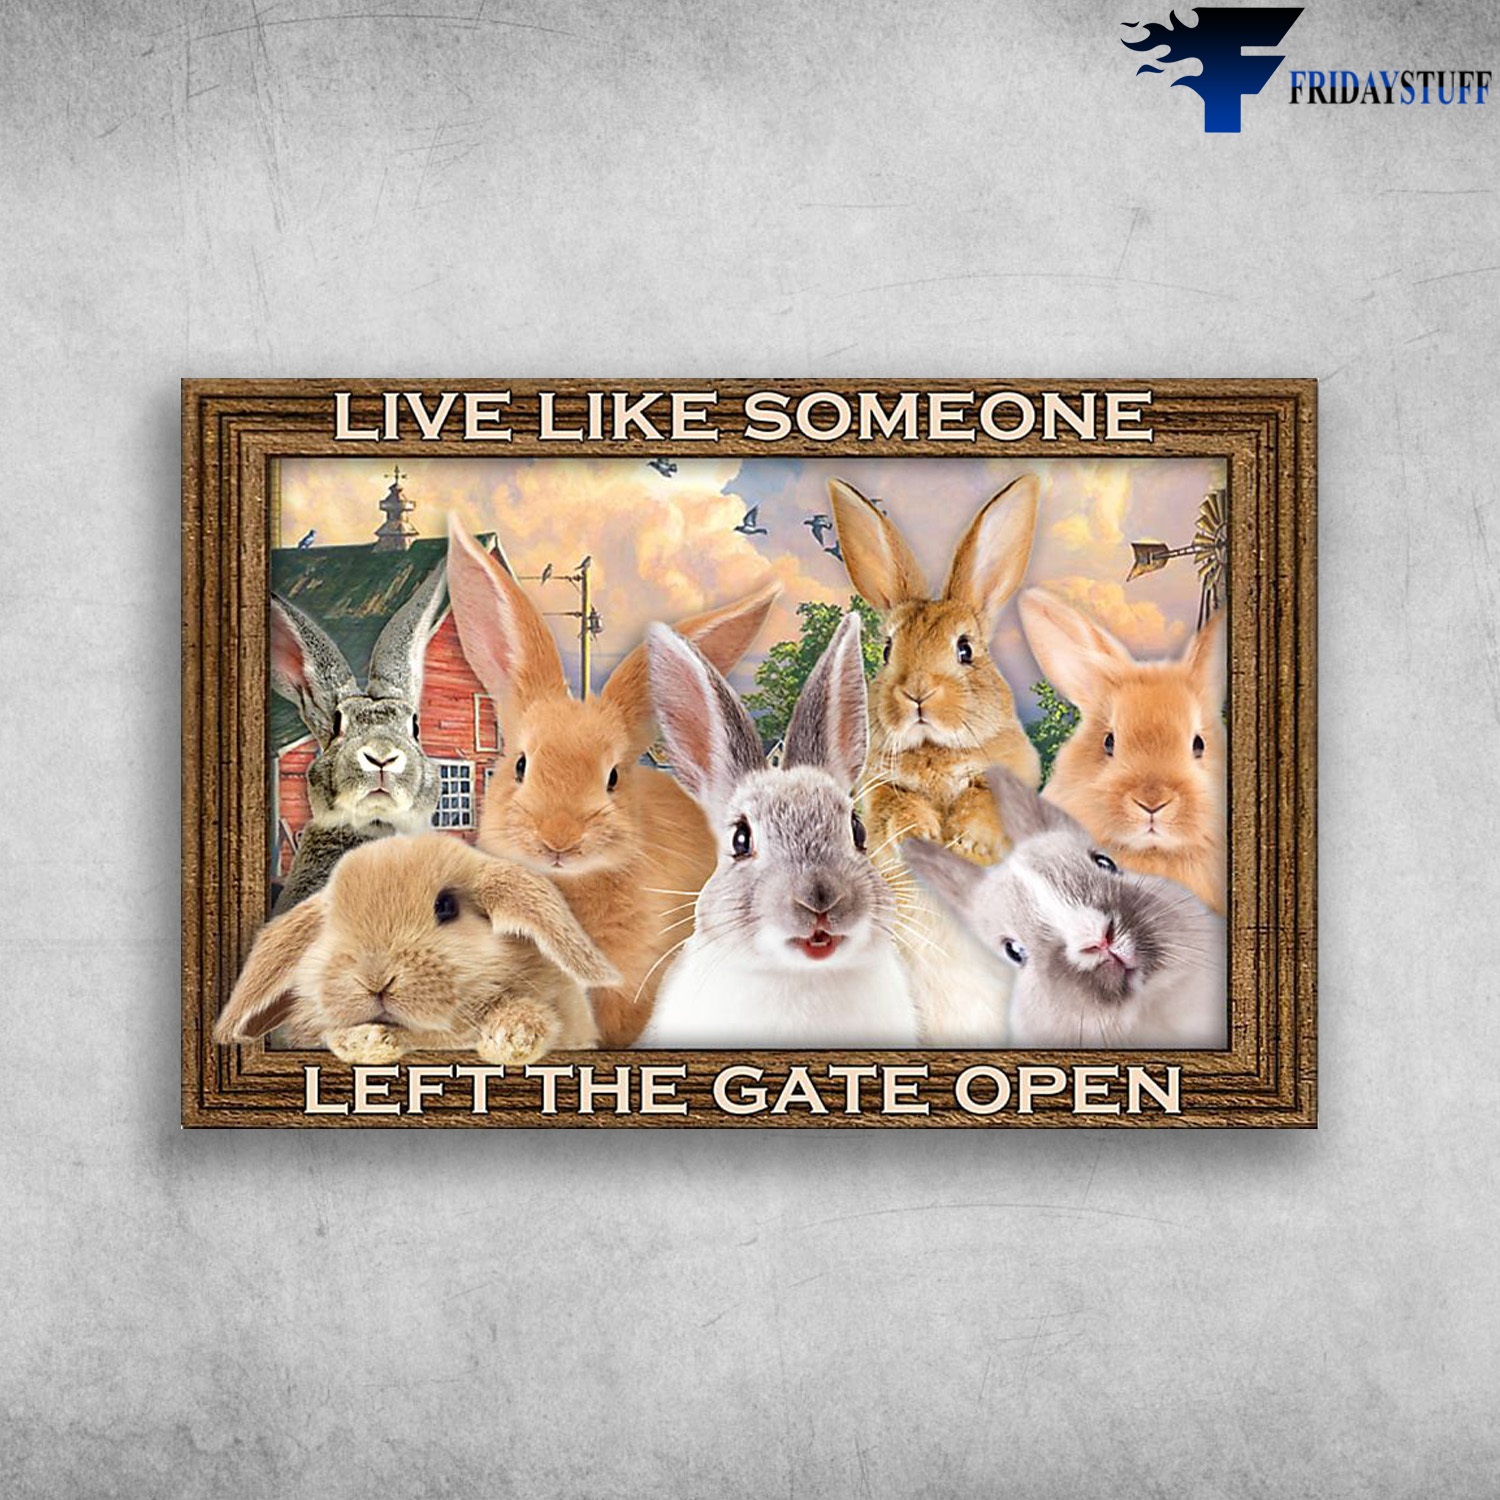 The Rabbit - Live Like Someone, Left The Gate Open